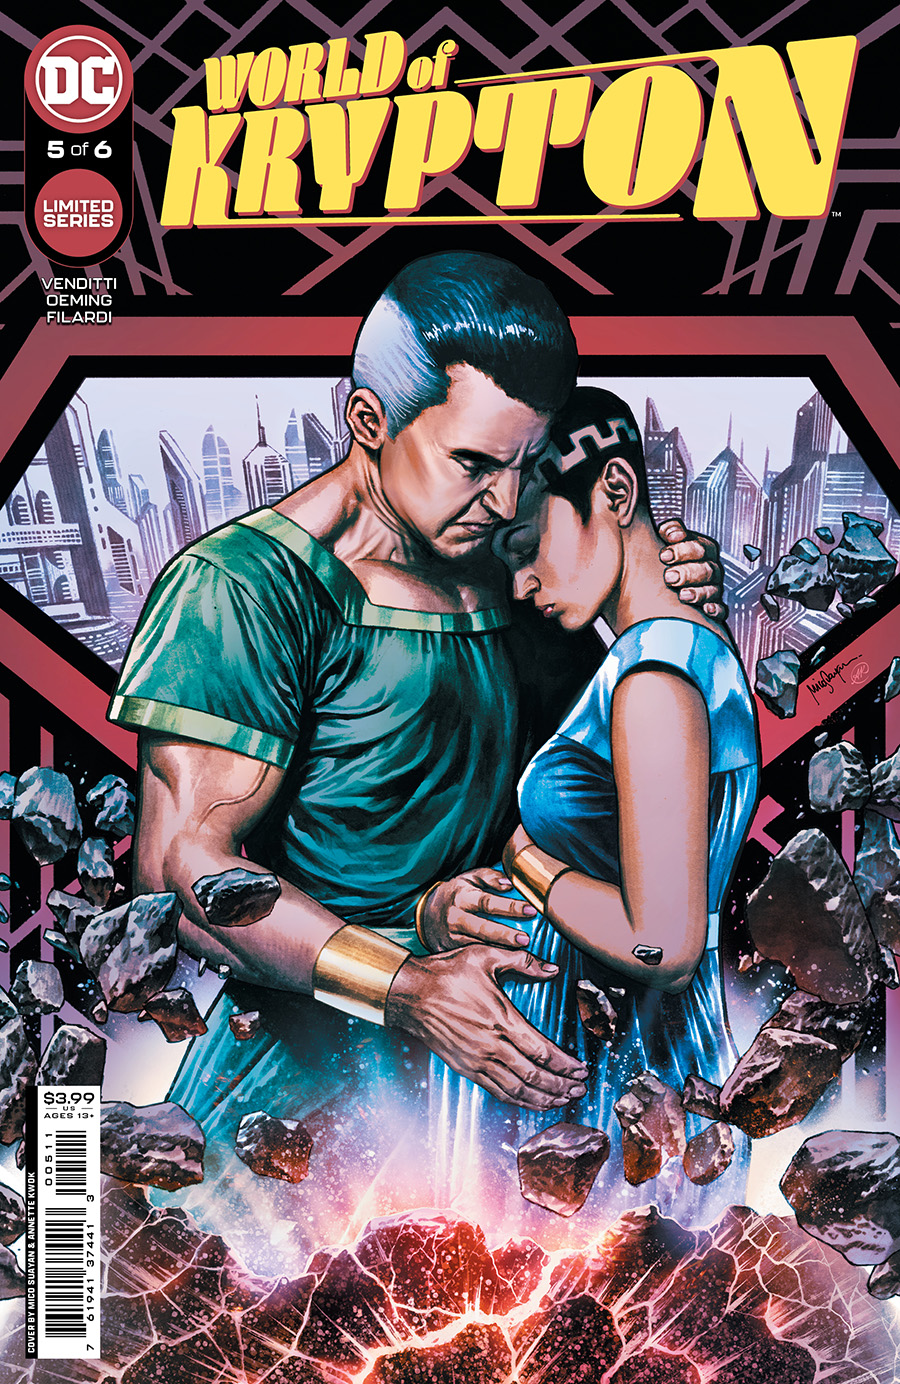 World Of Krypton Vol 3 #5 Cover A Regular Mico Suayan & Annette Kwok Cover